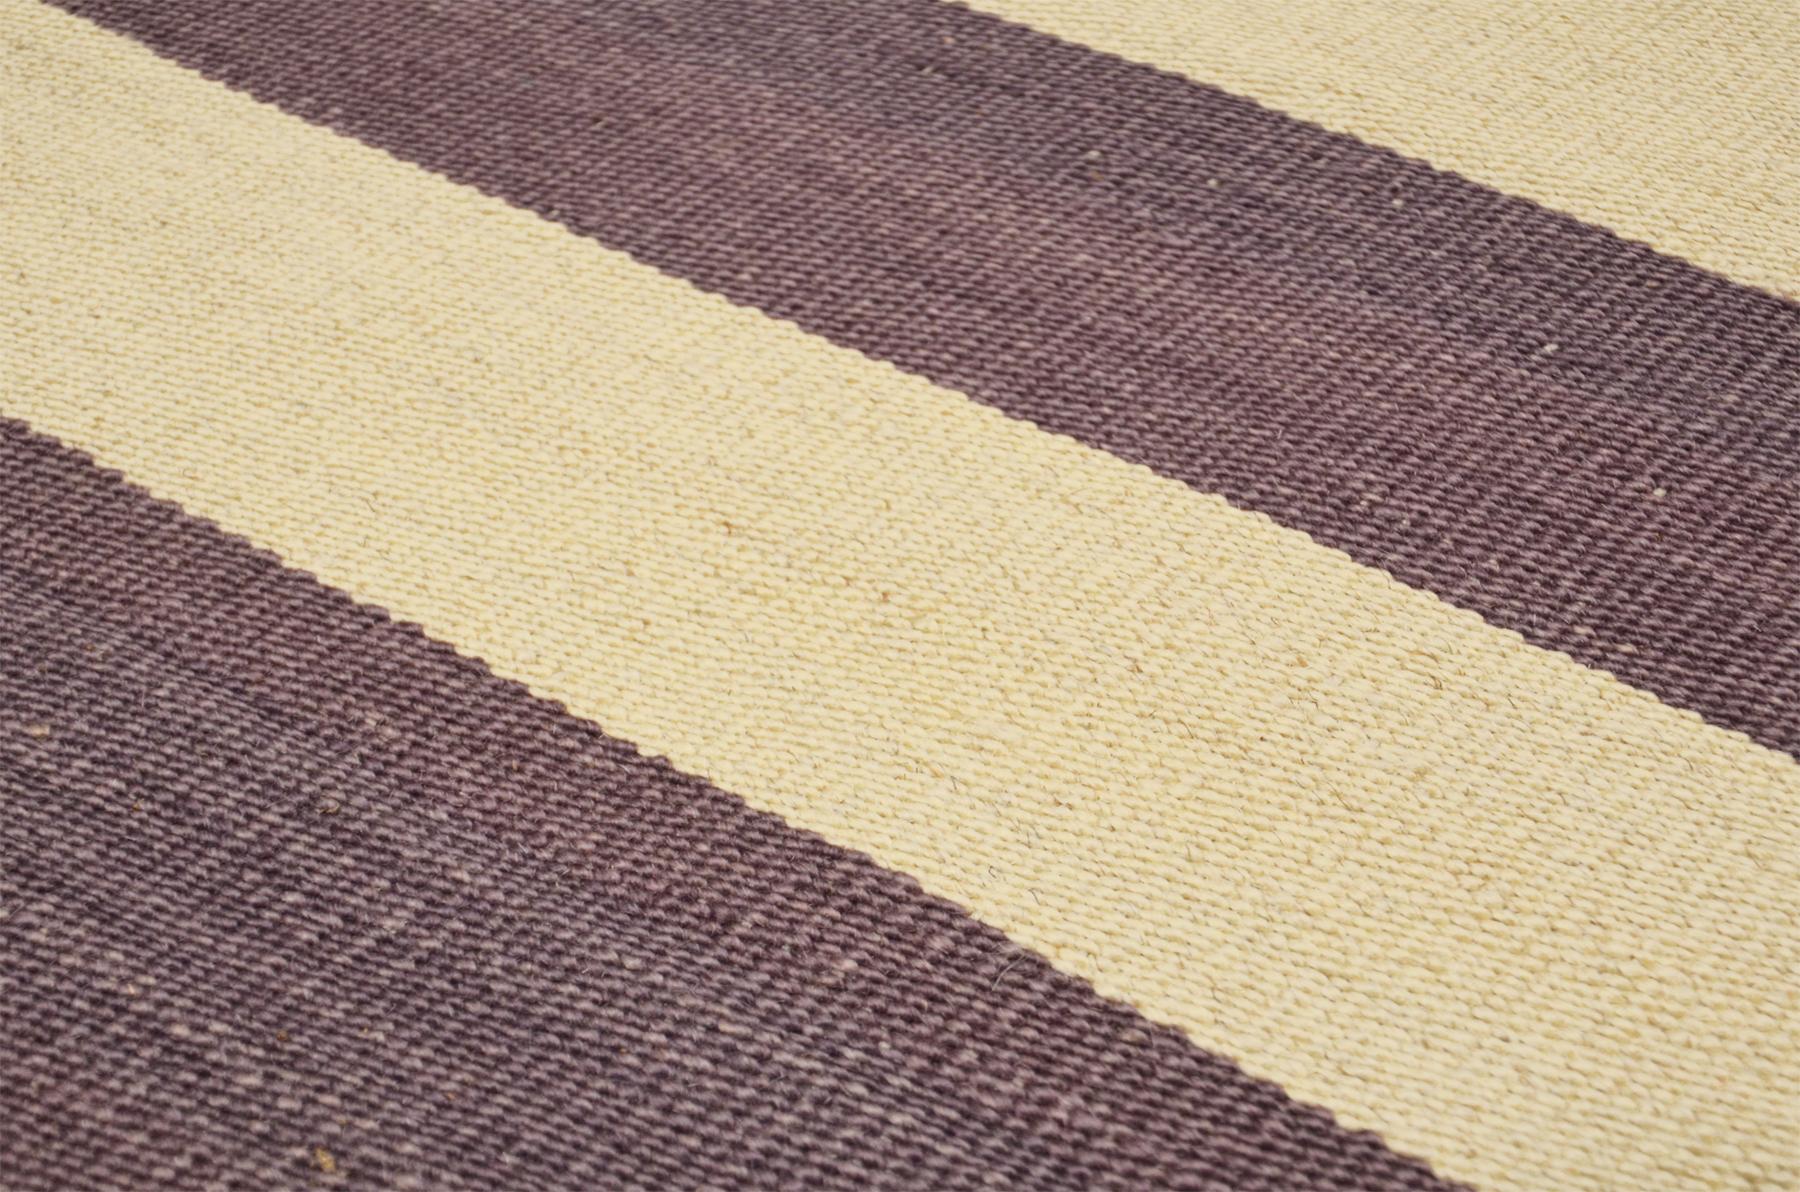 Corridor in purple tones of 3.90 x 0.85.
- Made with hand-aged wool in the artisan workshops that the Zigler firm has in Pakistan.
- Modern and with character.
- Our clients love this type of piece for any walkway area.
- It is a unique rug,